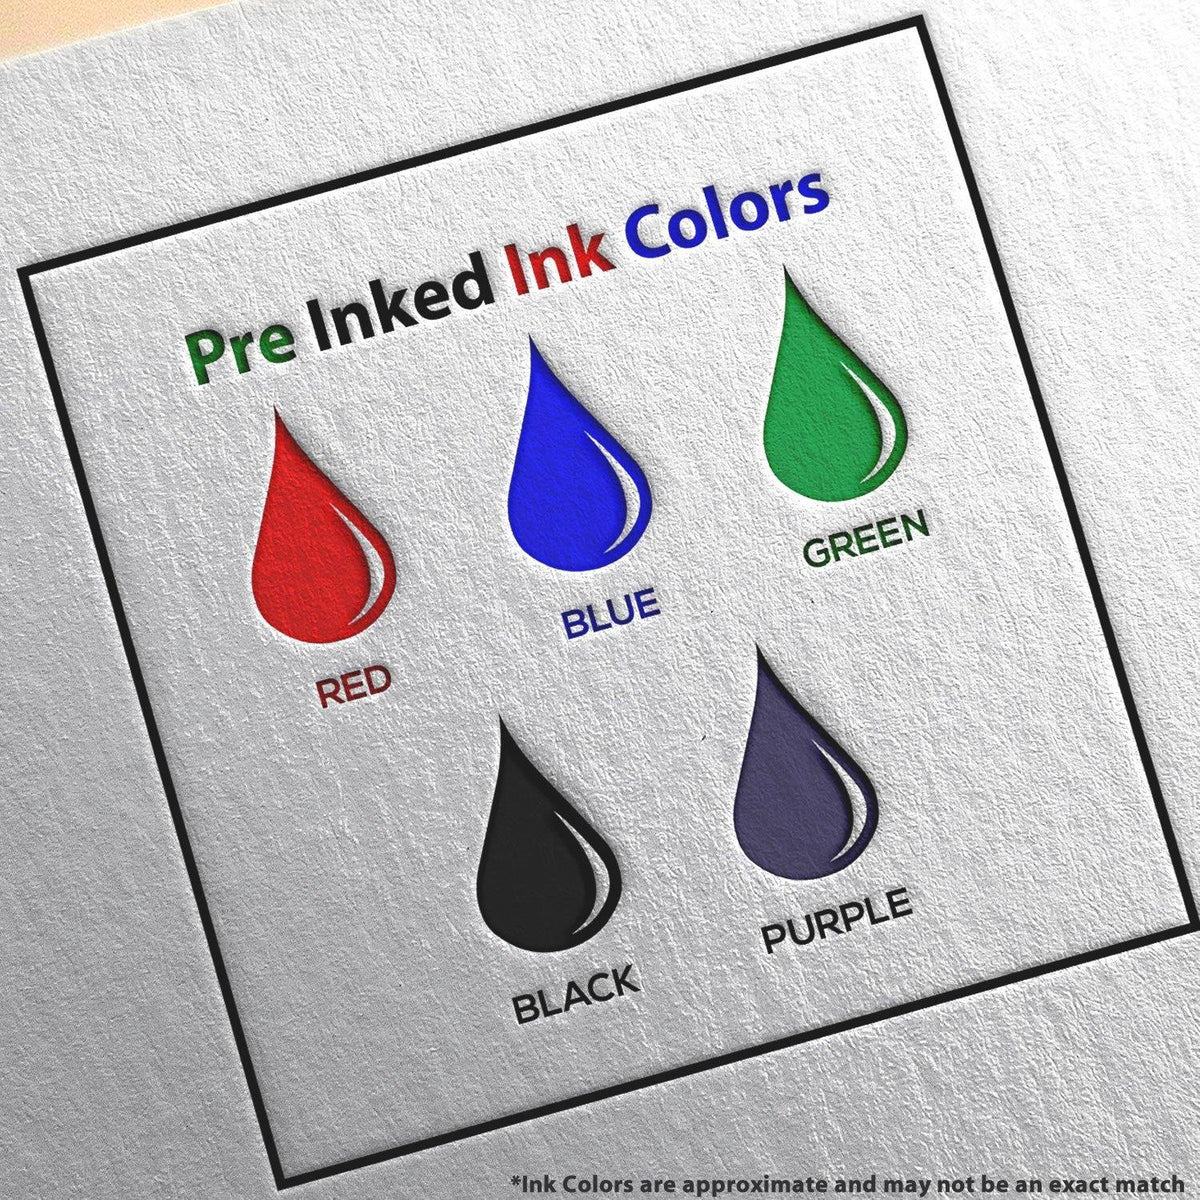 Slim Pre-Inked File Copy with Drawer Stamp Ink Color Options